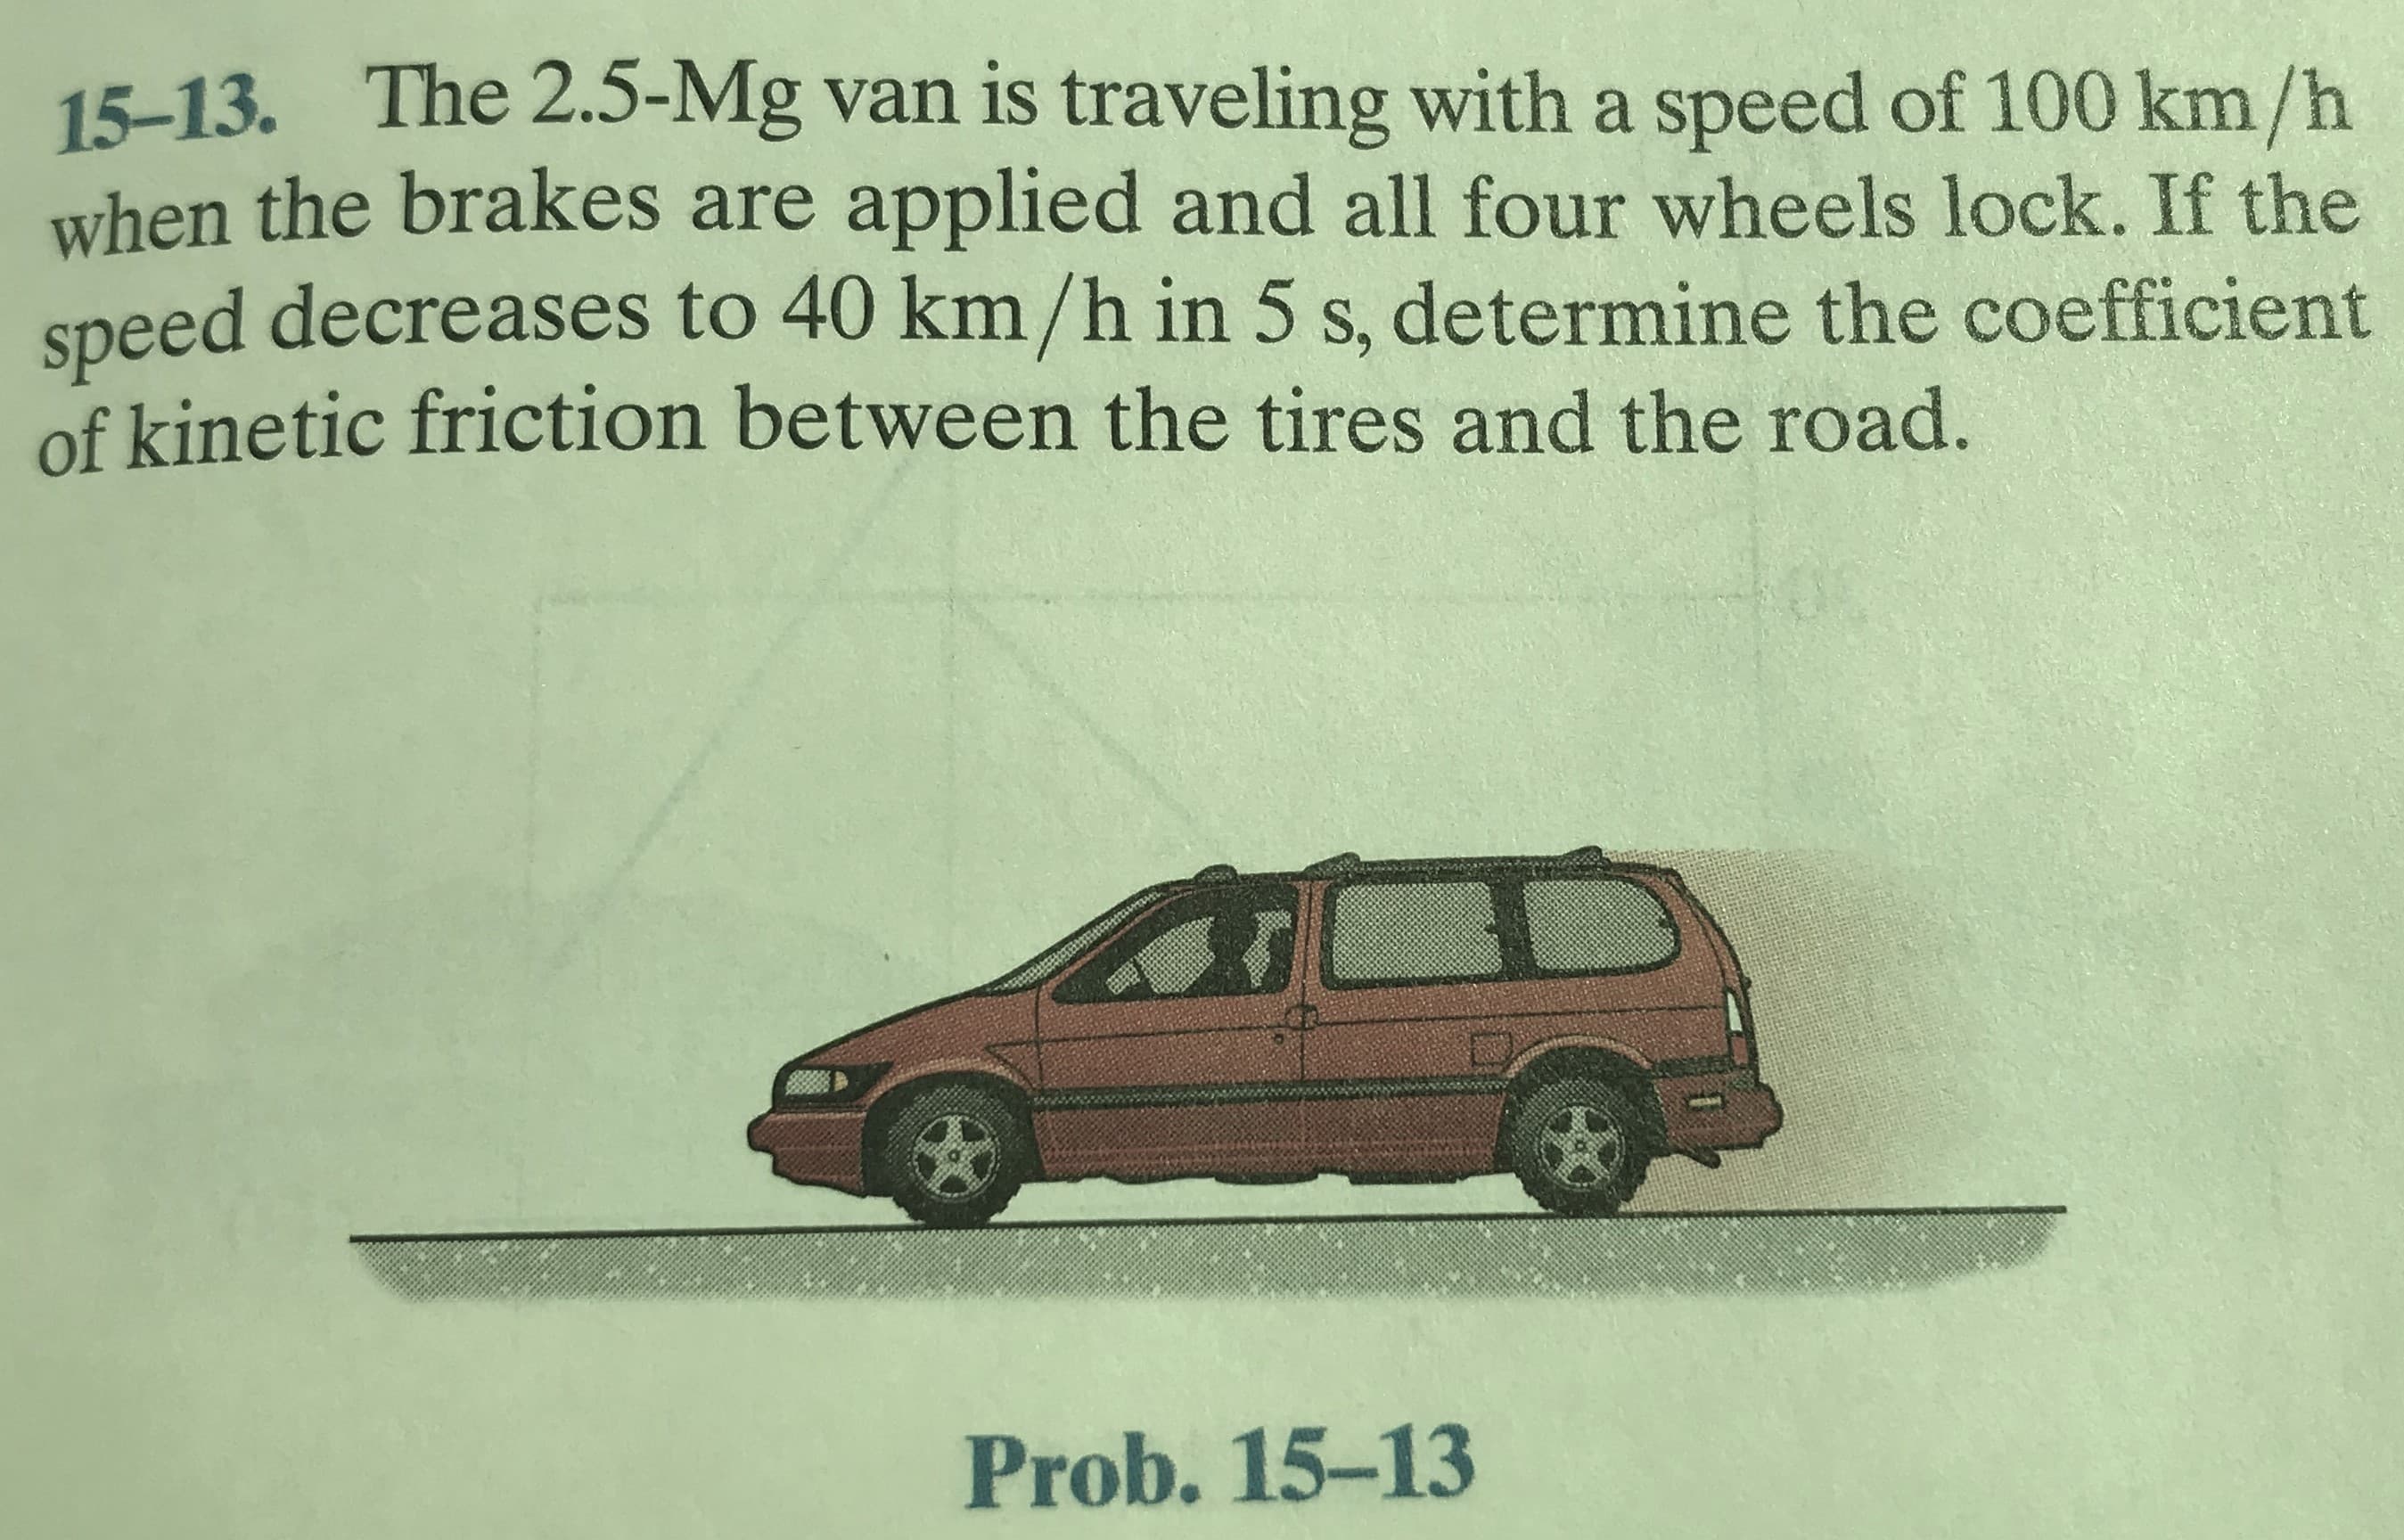 15-13. The 2.5-Mg van is traveling with a speed of 100 km/h
when the brakes are applied and all four wheels lock. If the
speed decreases to 40 km/h in 5 s, determine the coefficient
of kinetic friction between the tires and the road.
Prob. 15-13
